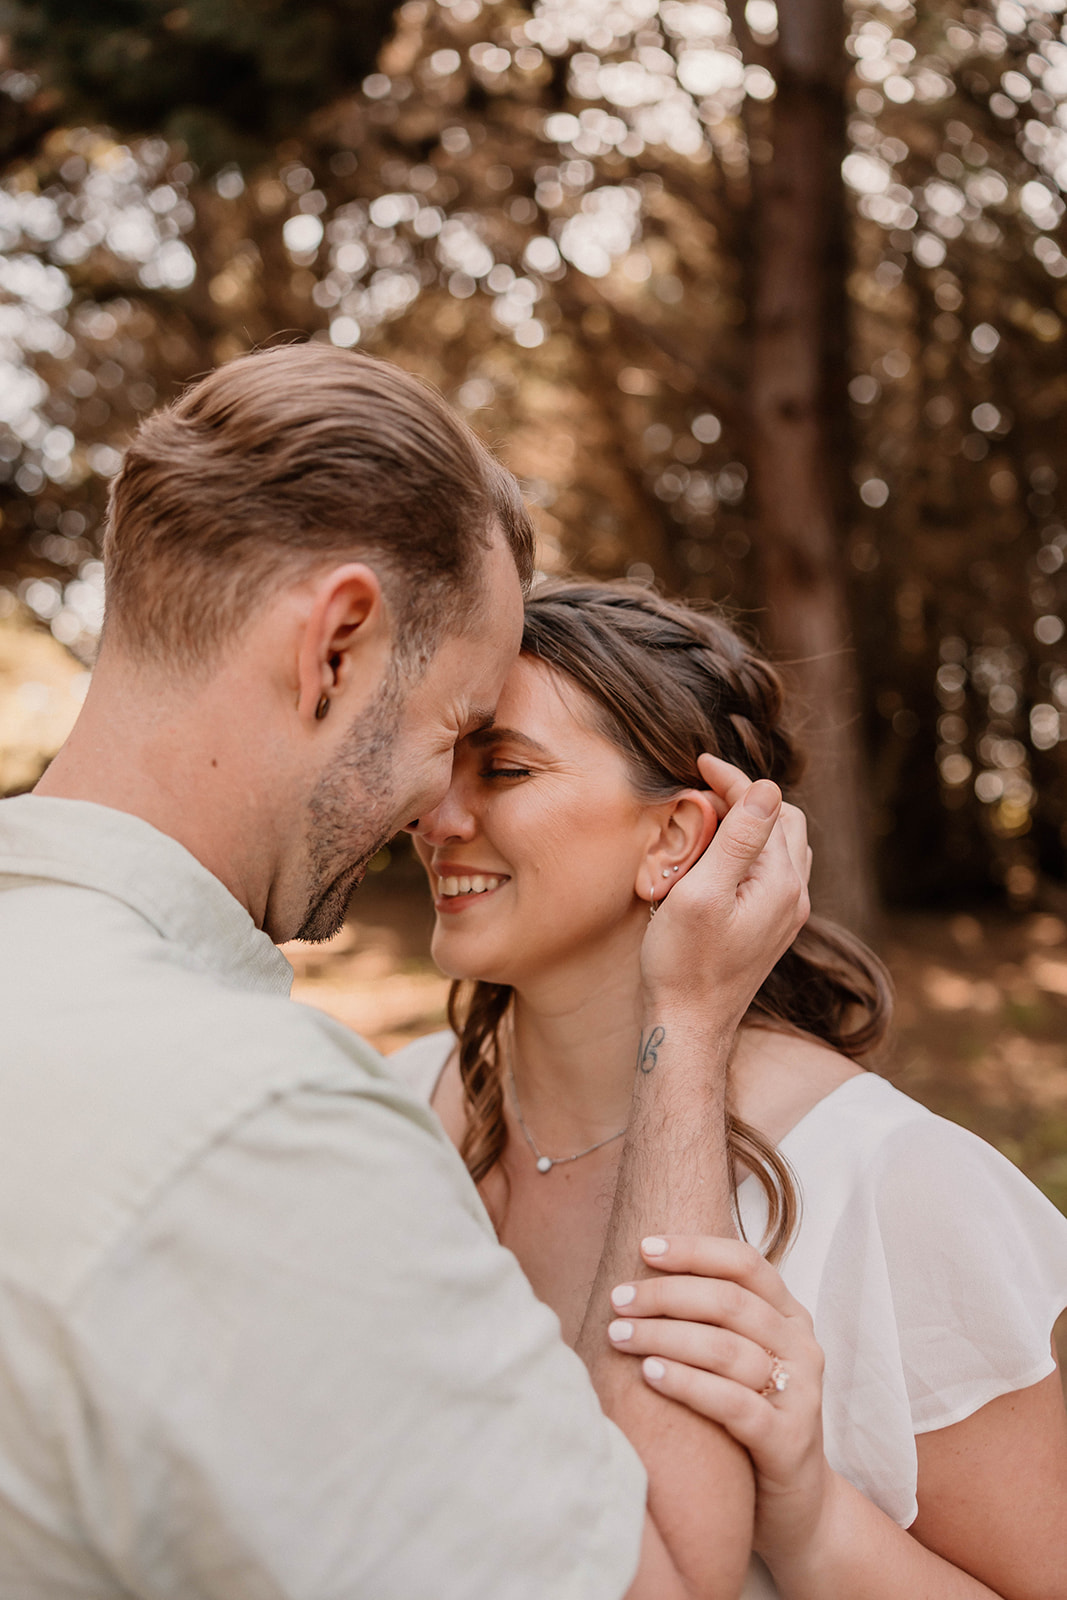 Outdoor Engagement Photos In Fort Bragg